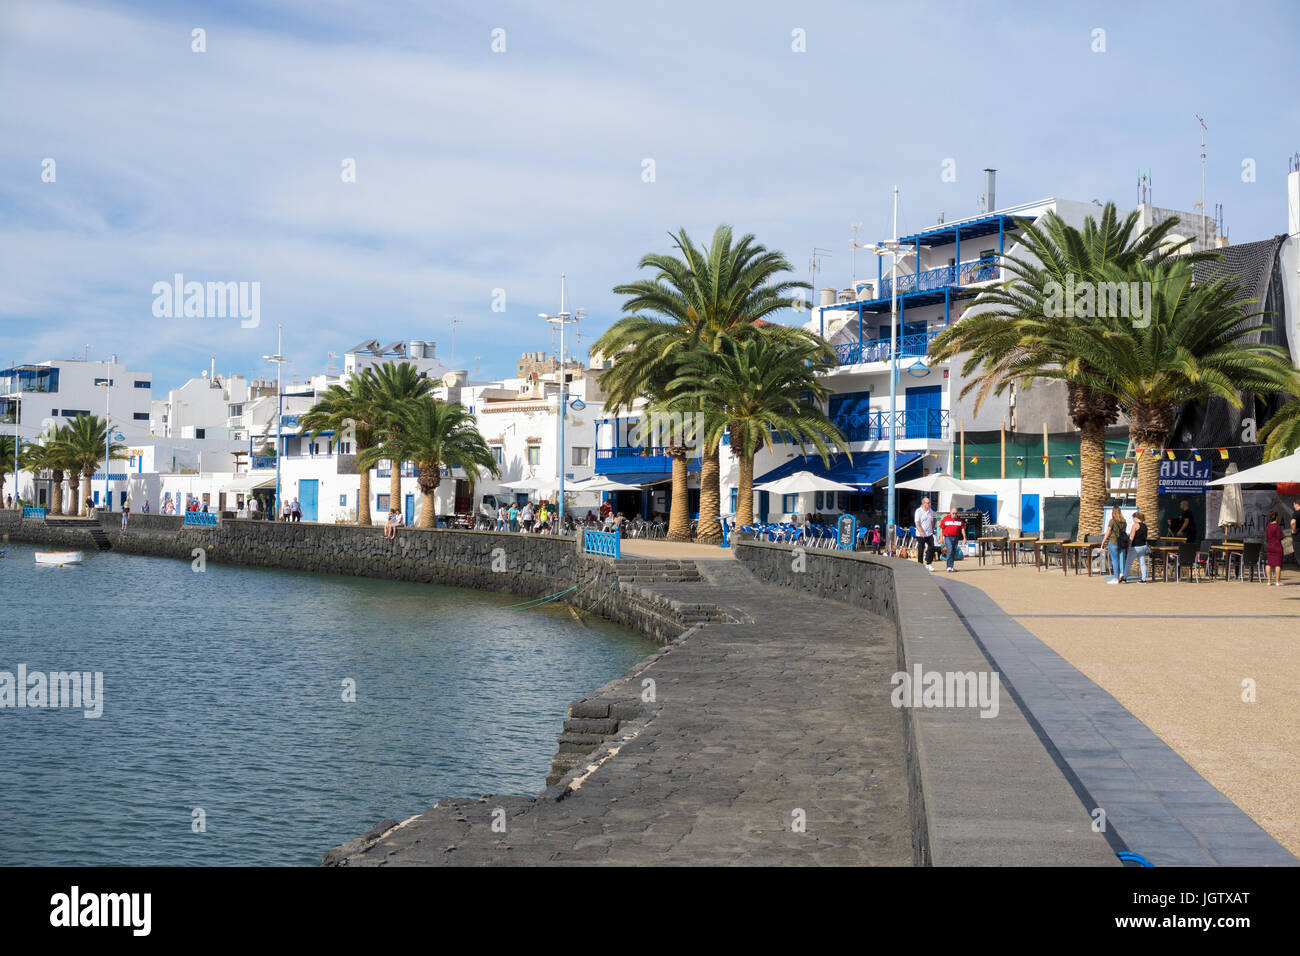 Street cafes at Charco San Gines, lagoon at Arrecife, Lanzarote island, Canary islands, Spain, Europe Stock Photo